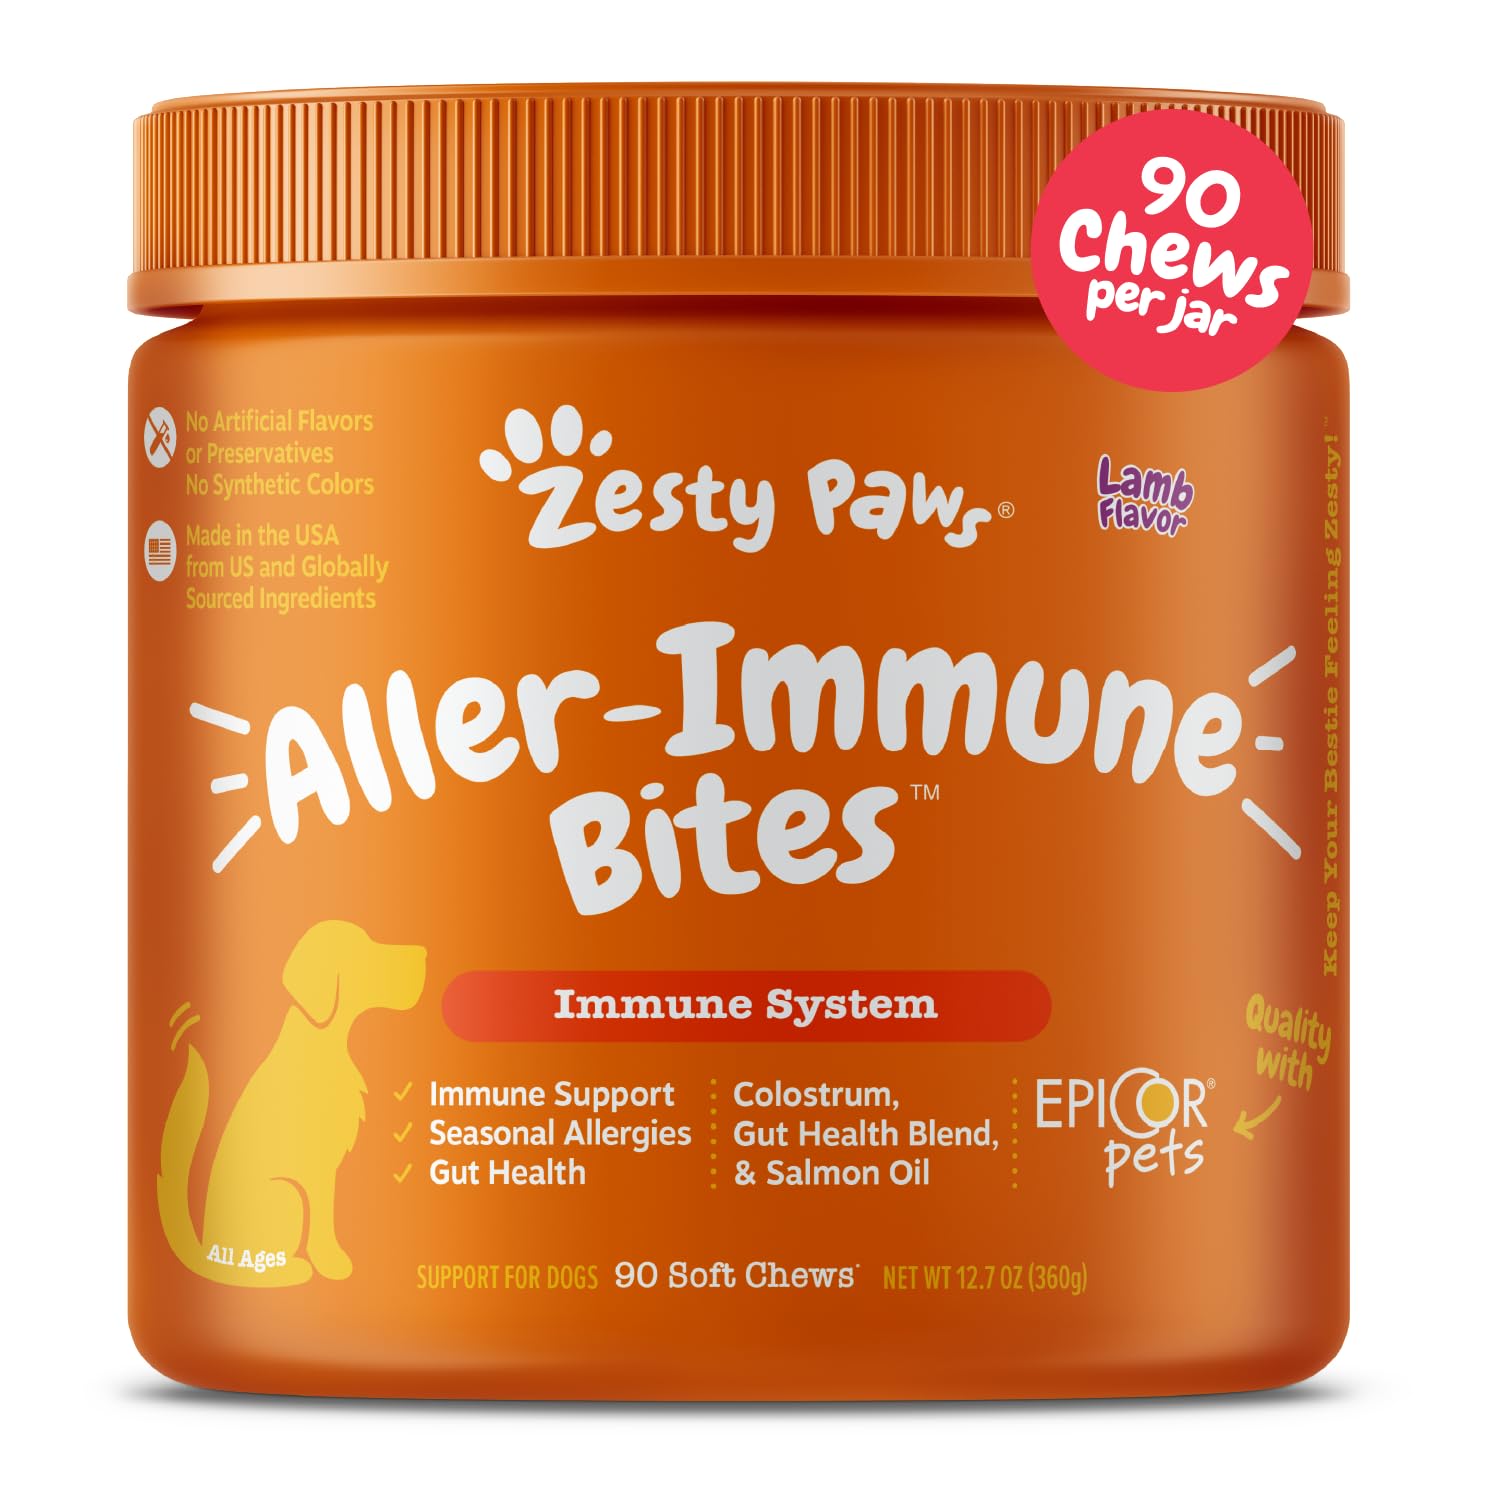 Zesty Paws Dog Allergy Relief - Anti Itch Supplement - Omega 3 Probiotics for Dogs - Salmon Oil Digestive Health - Soft Chews for Skin & Seasonal Allergies - with Epicor Pets